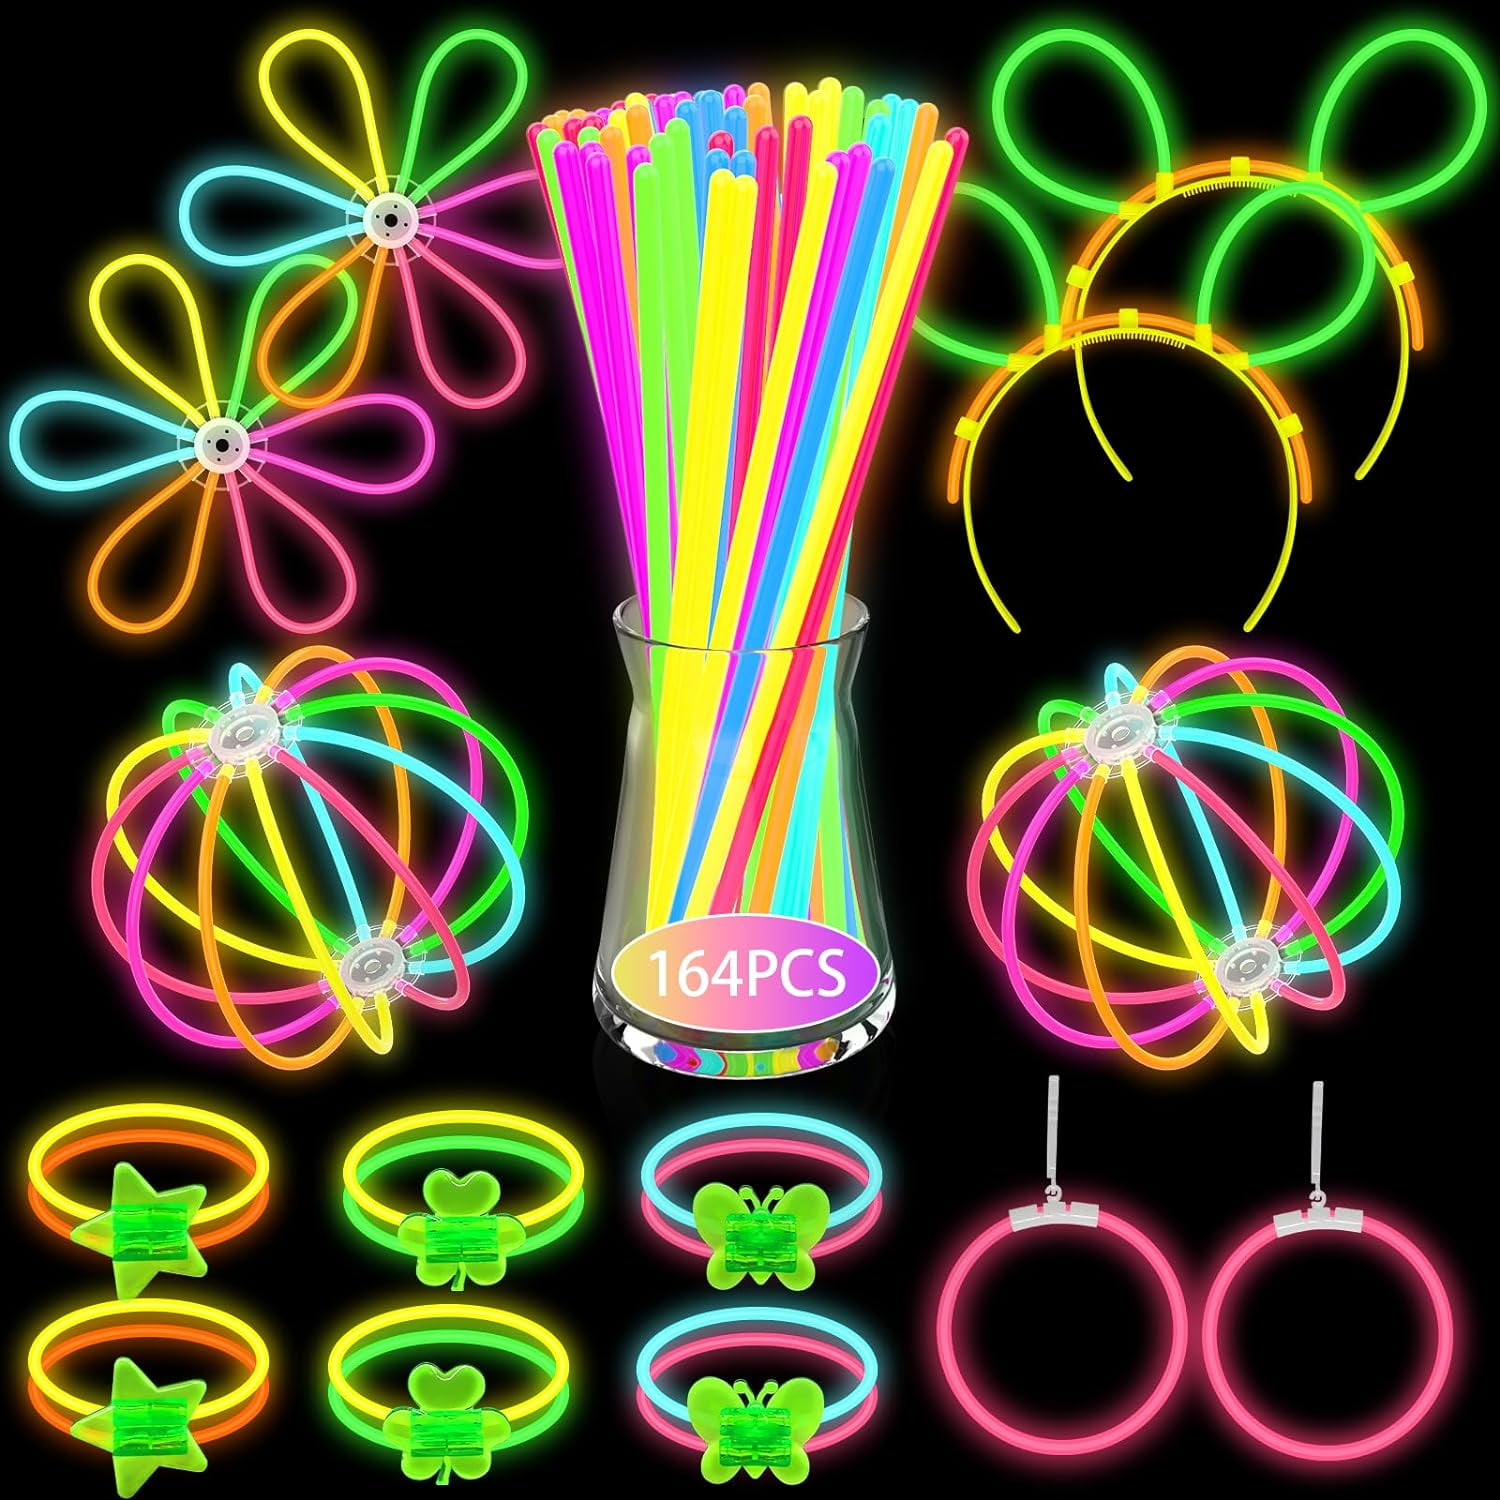 60-240 Pack Glow Sticks Party Supplies 5 Neon Colors Glow Sticks